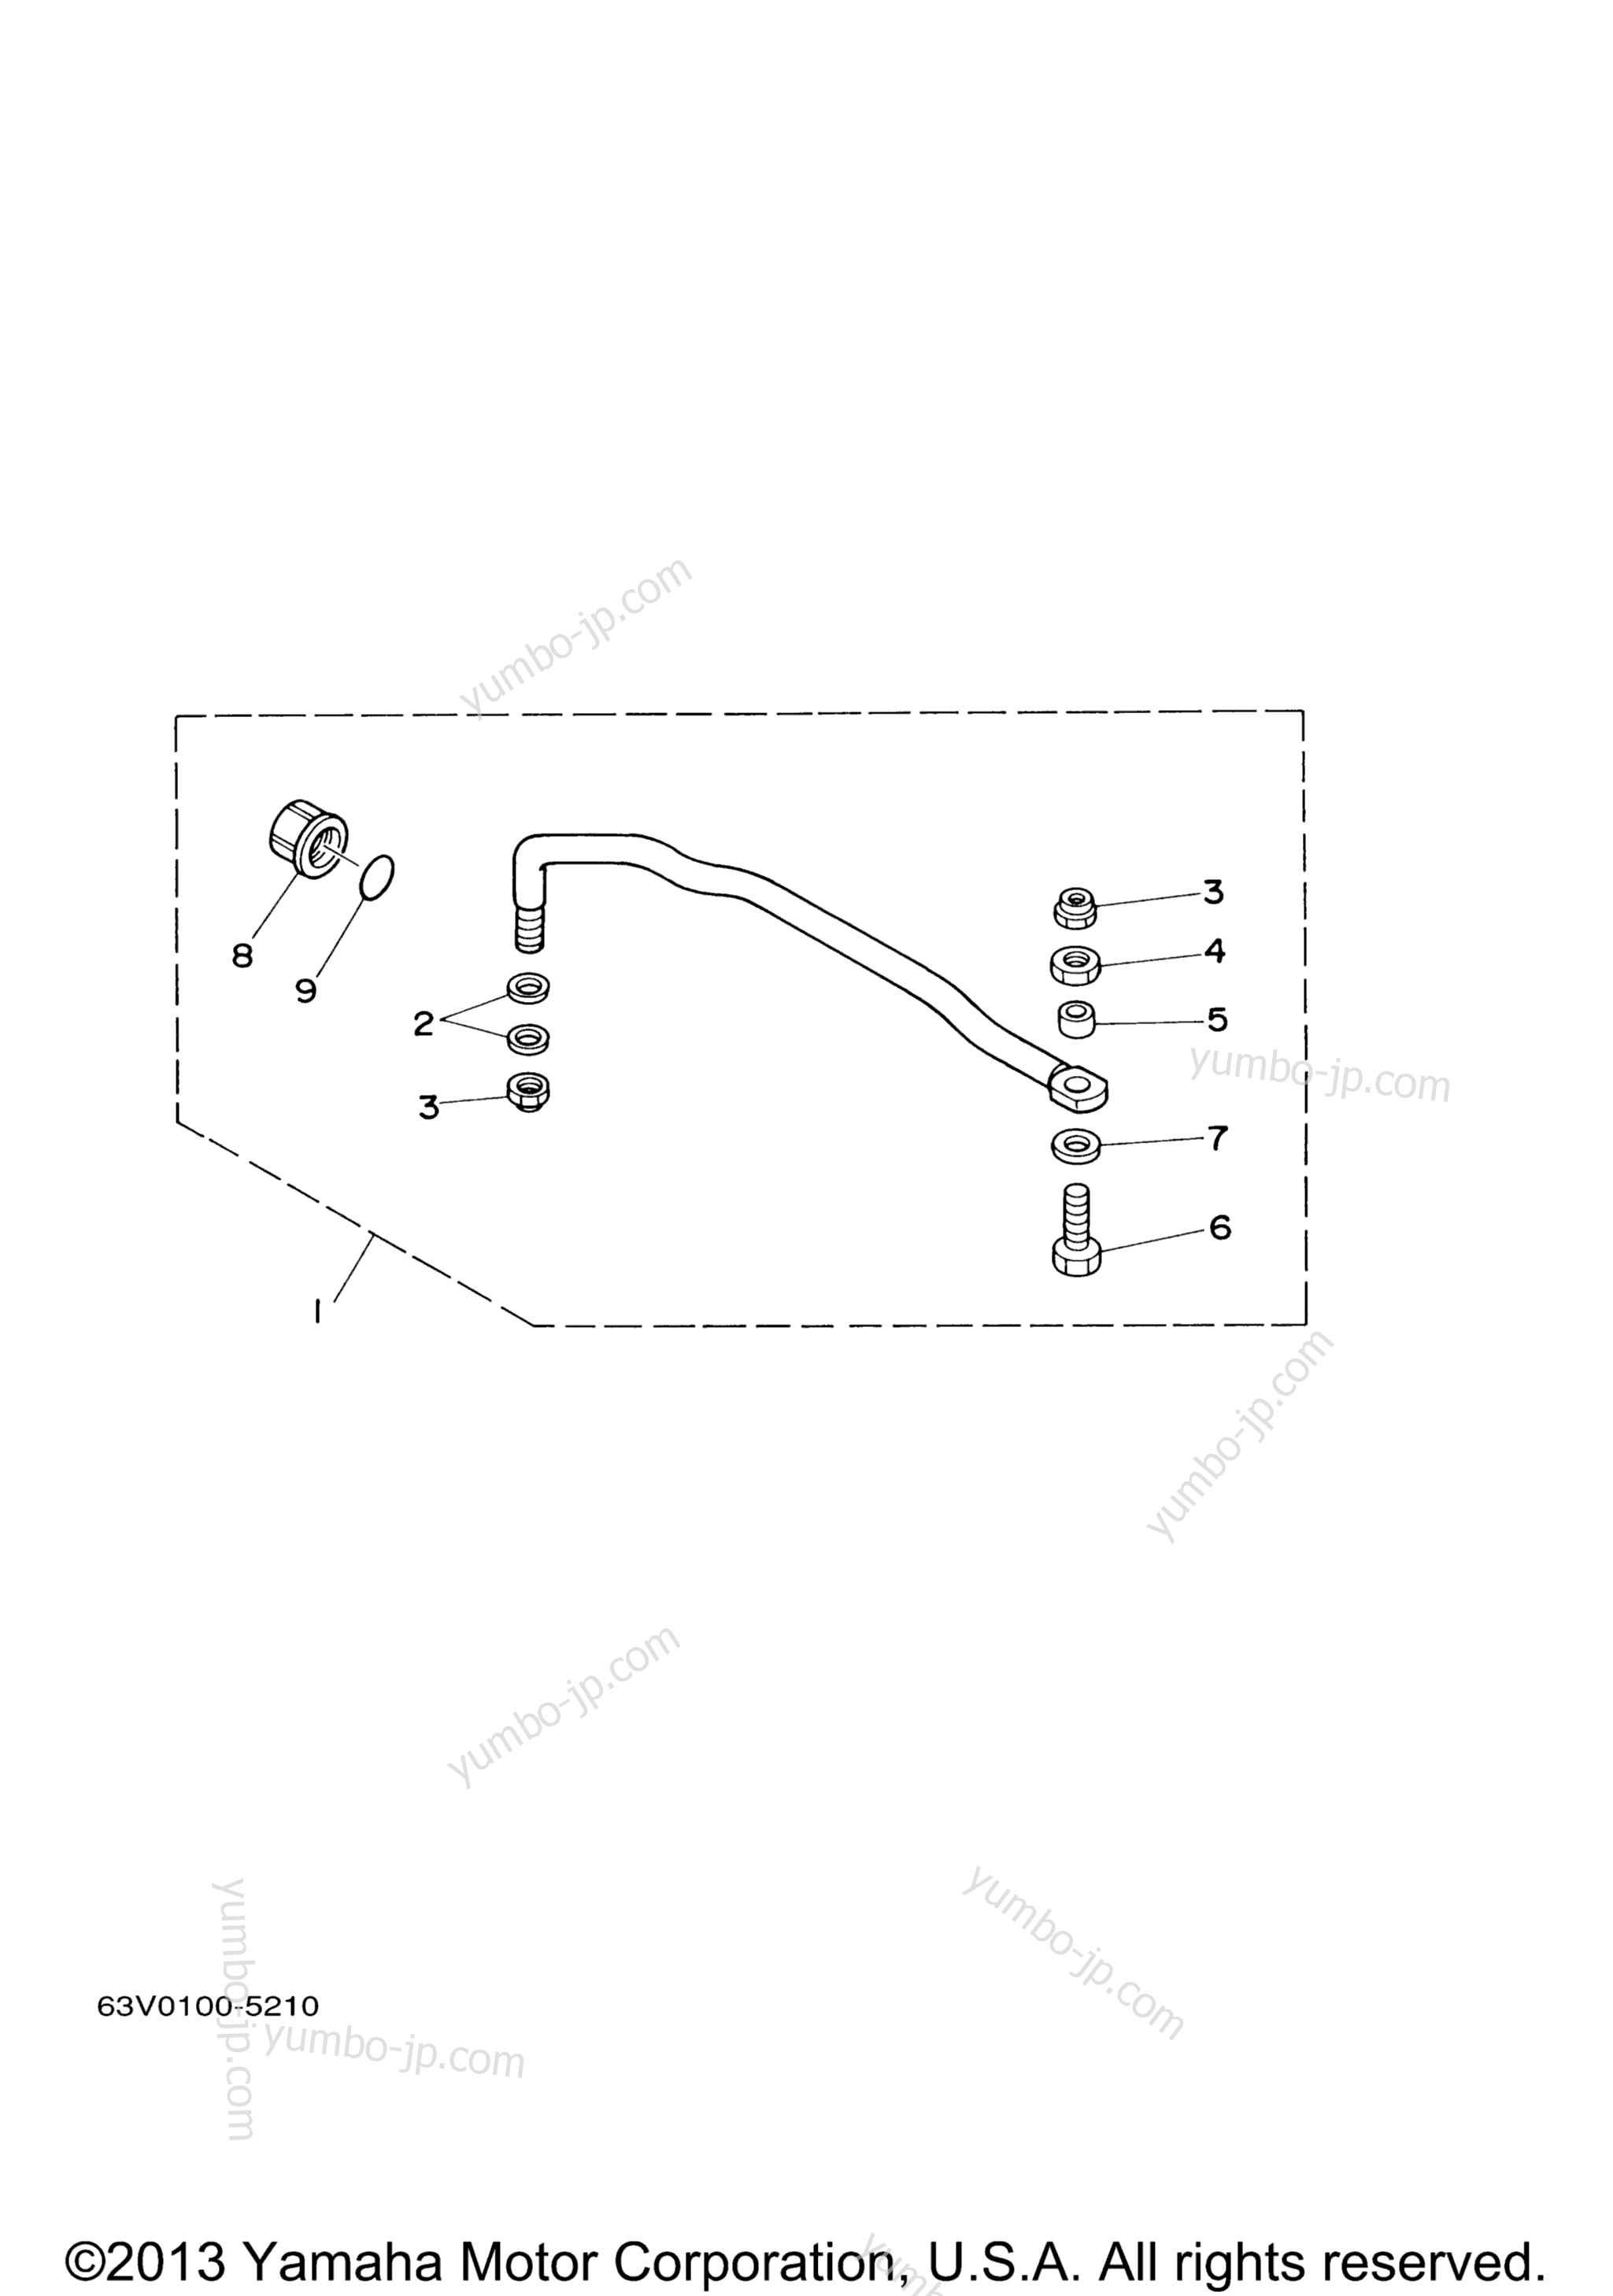 Steering Guide for outboards YAMAHA F9.9MLH2 (0405) 66N-1004576~1005500 F9.9MSH2_MLH2_ELR2 66NK-100000 2006 year